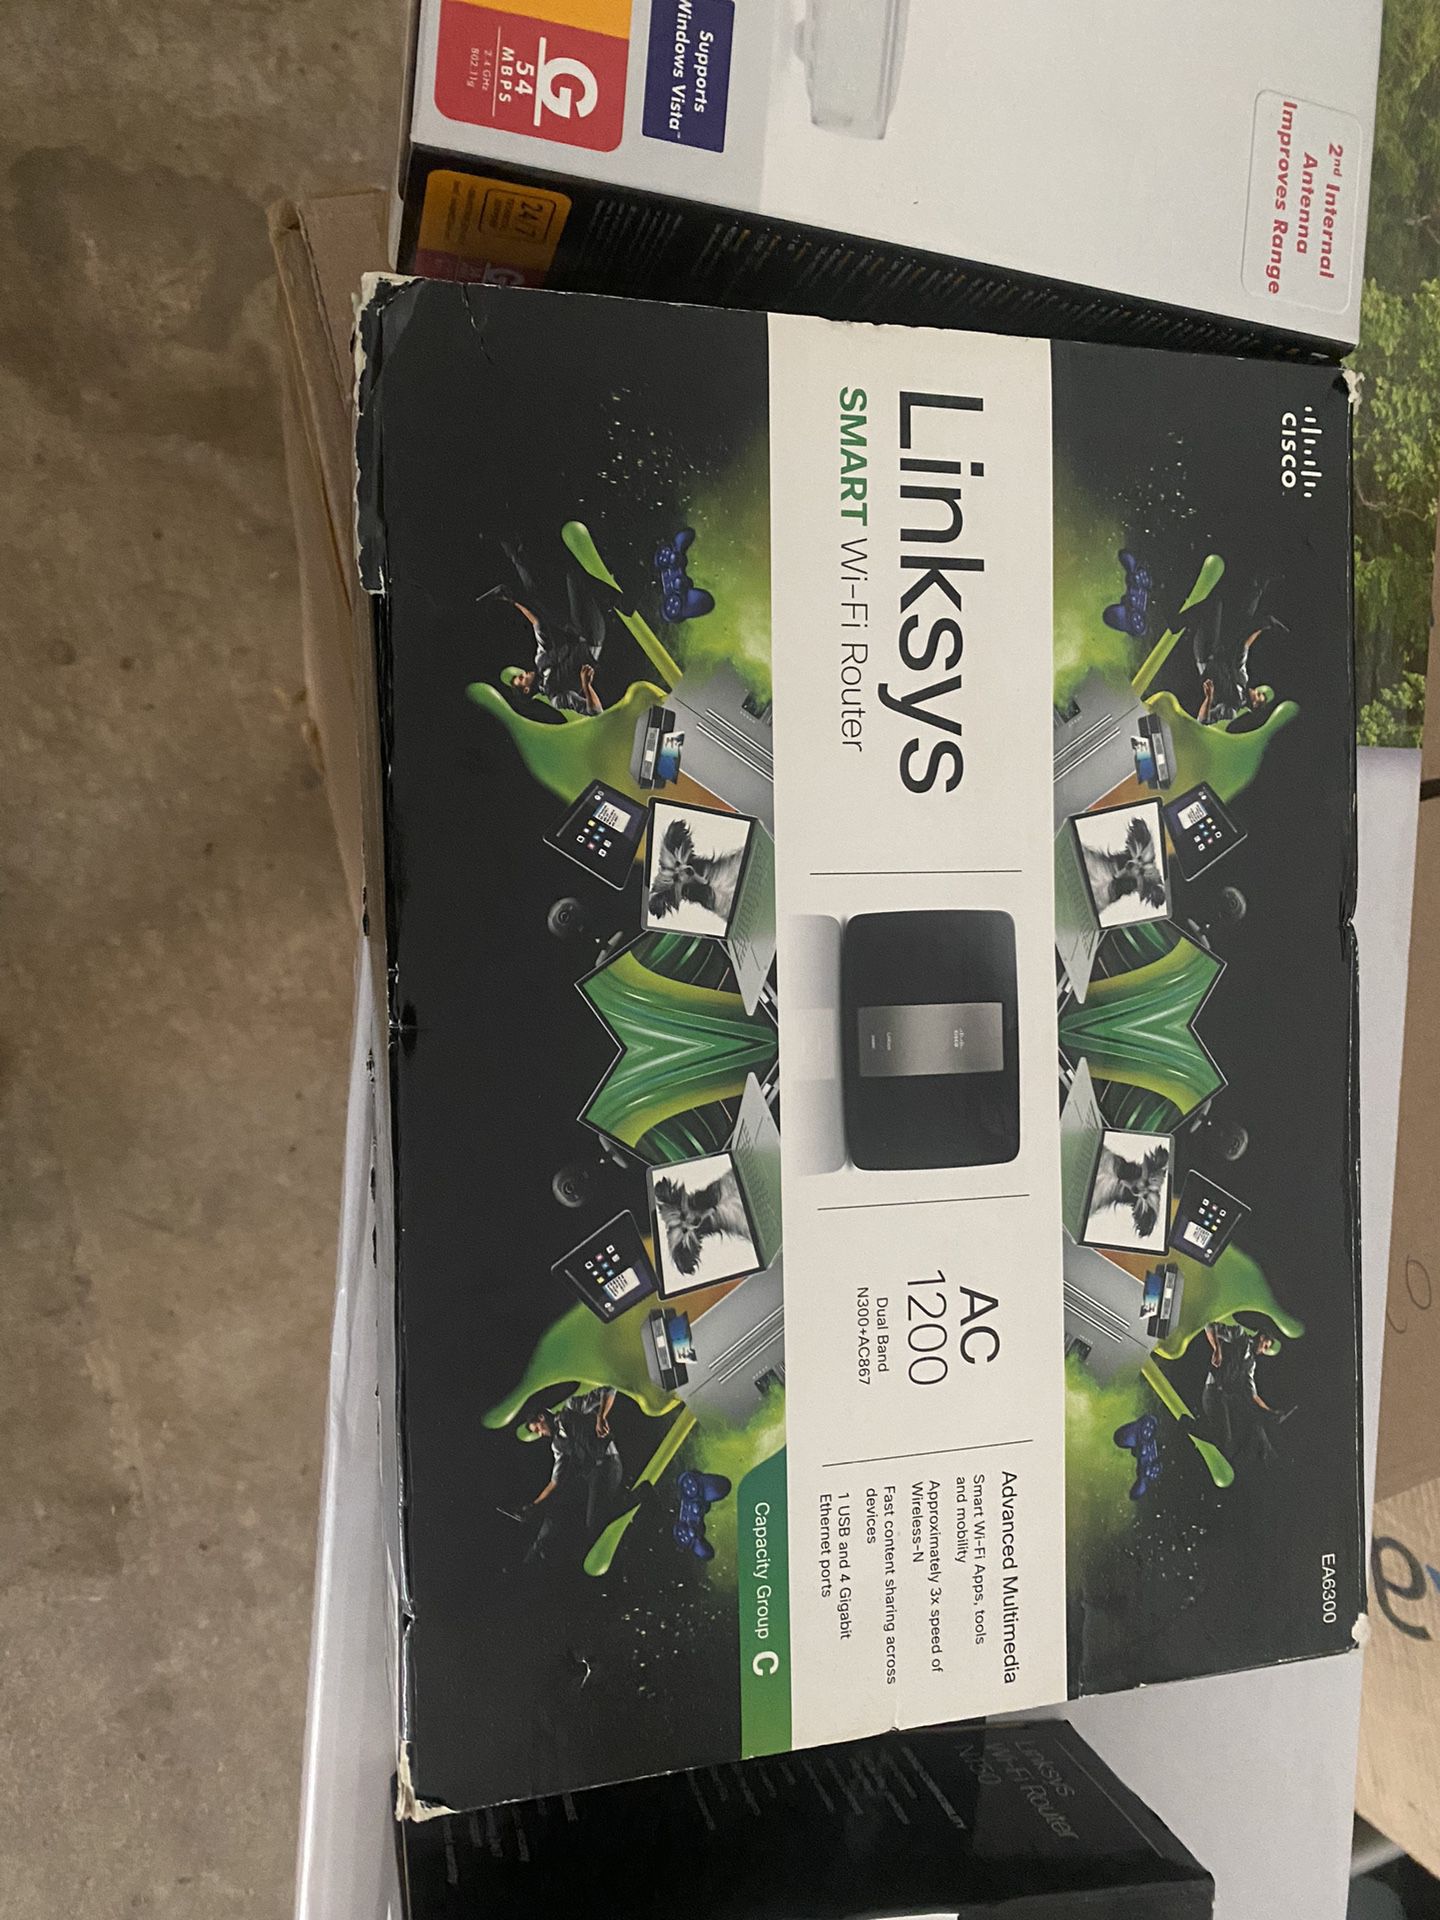 Linksys Ac1200 WiFi Router